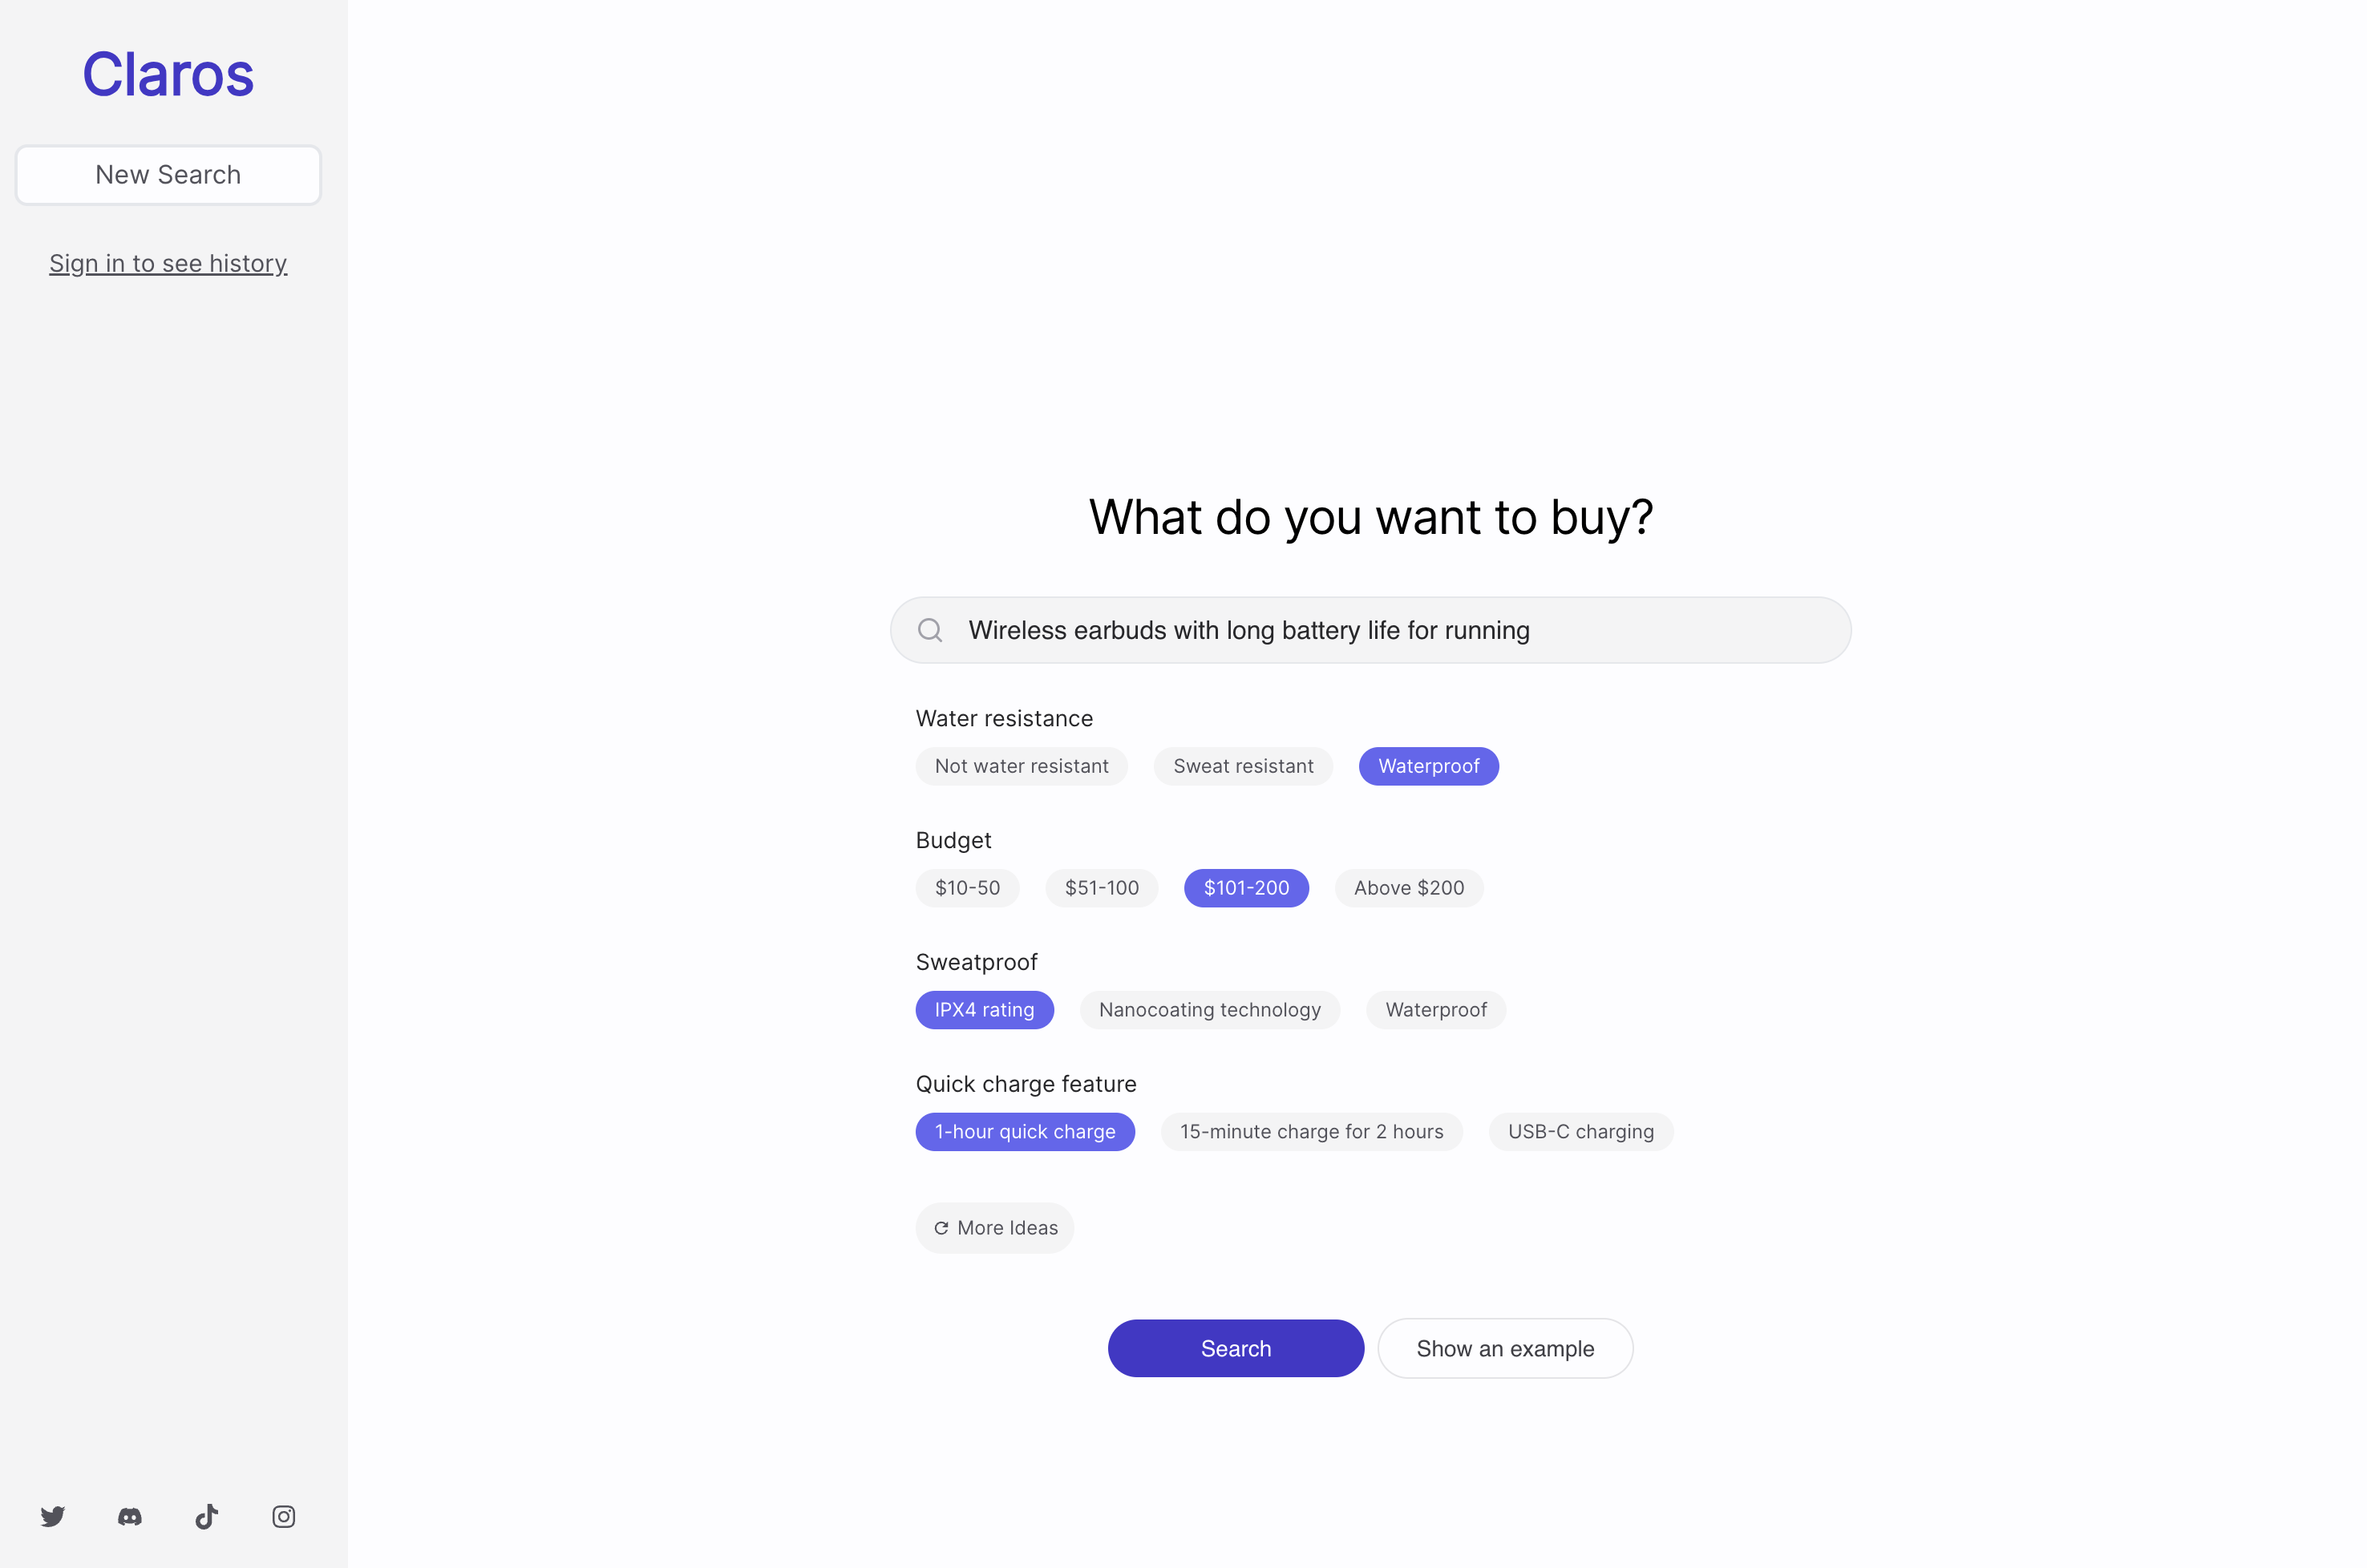 claros-2 - An AI shopping assistant to find you better products faster